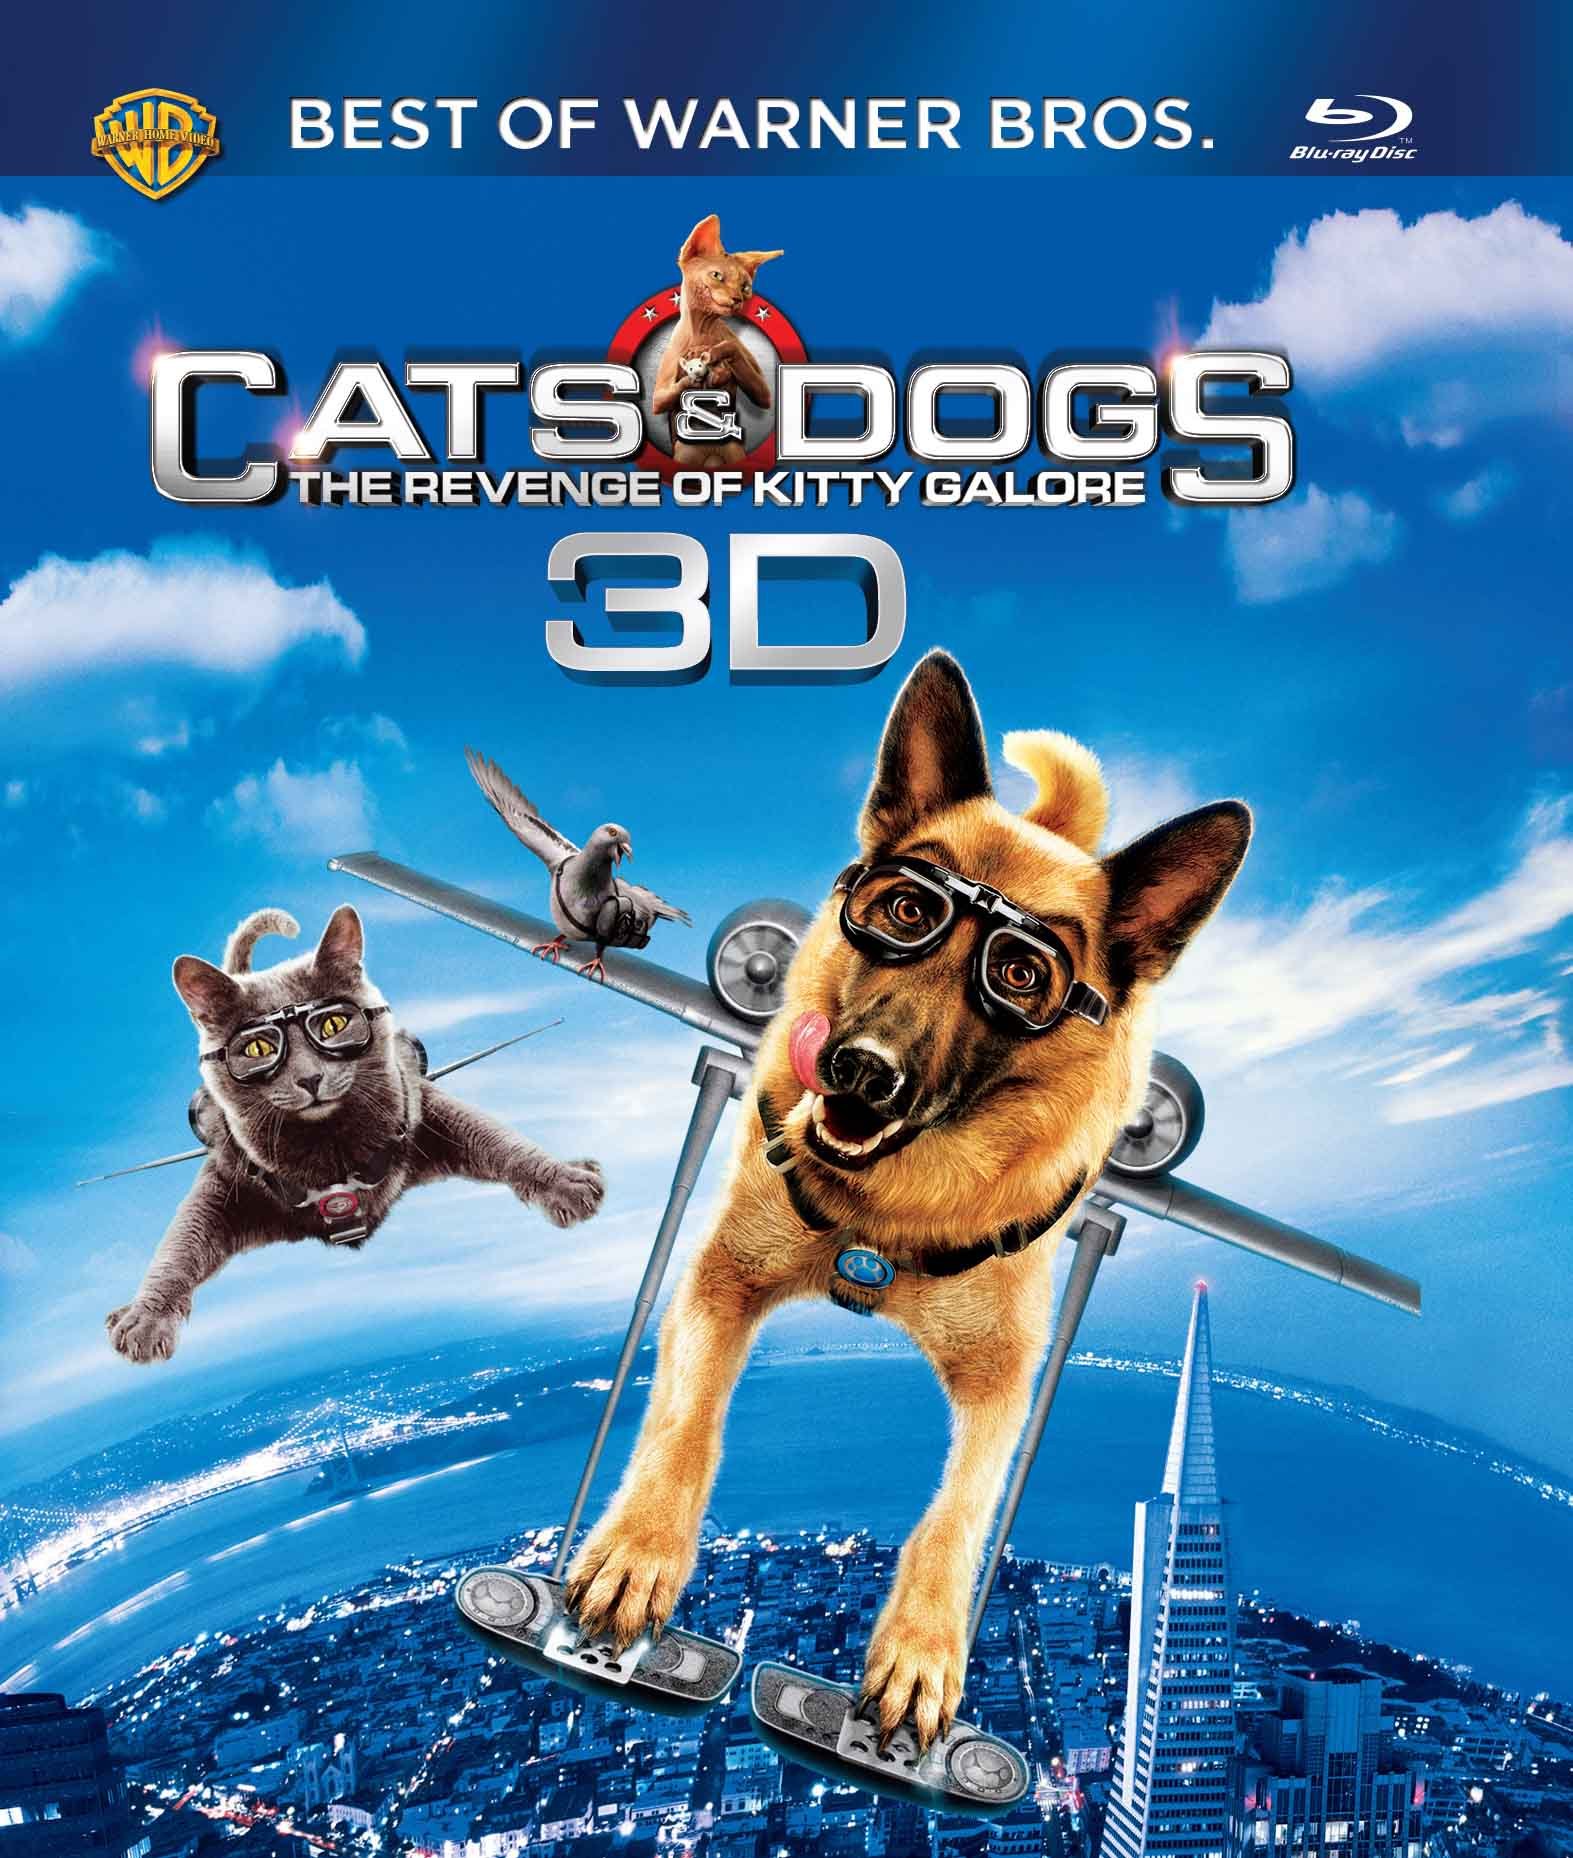 cats-and-dogs-2-the-revenge-of-kitty-galore3d-movie-purchase-or-wat